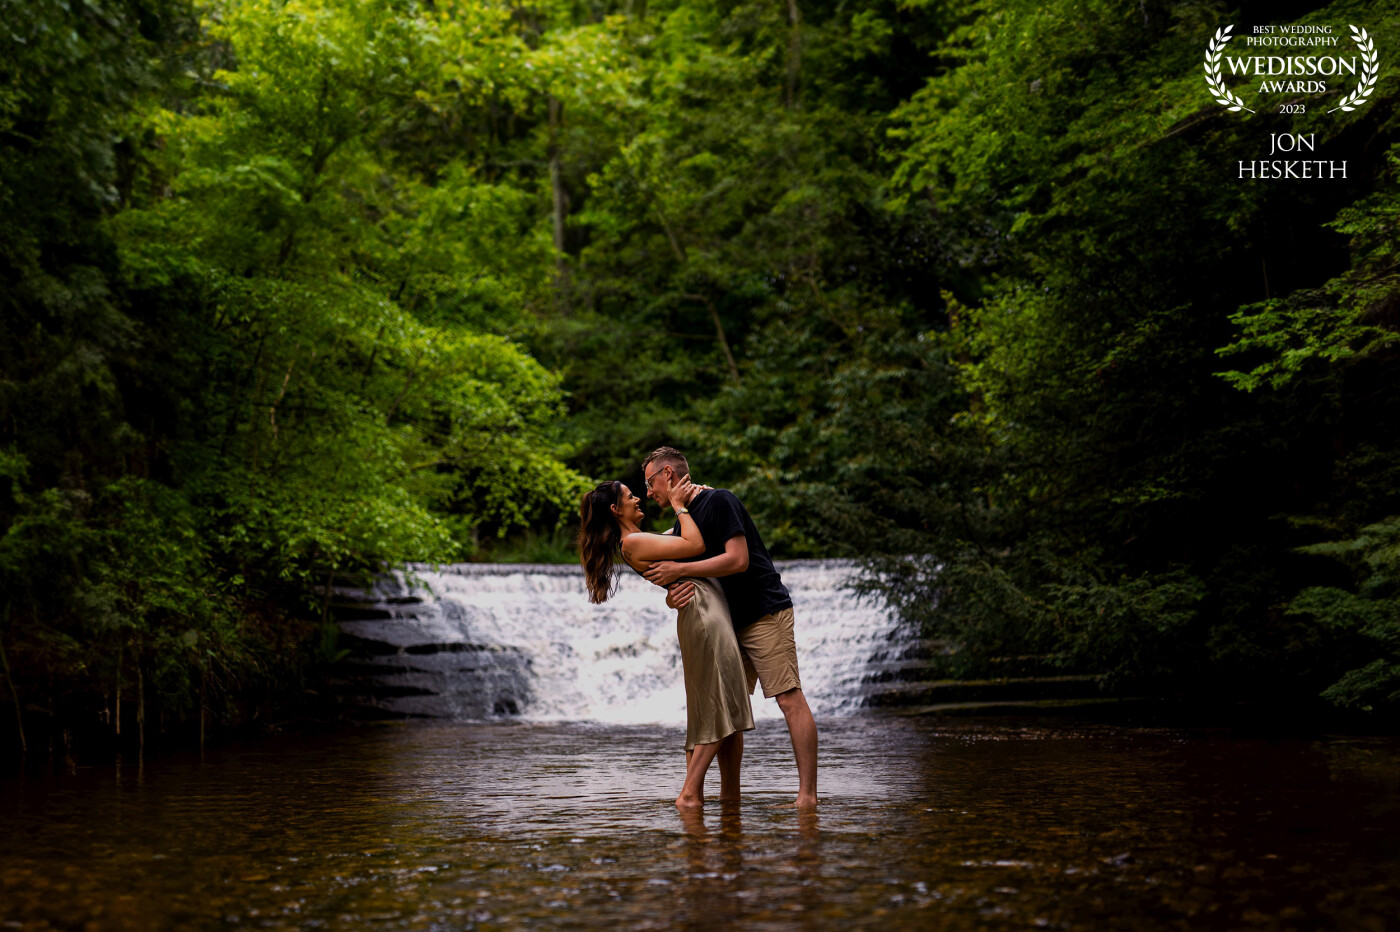 Abbie & Jac’s pre wedding shoot in the woods right next to the church they are getting married in August. They braved the water for such a beautiful moment.